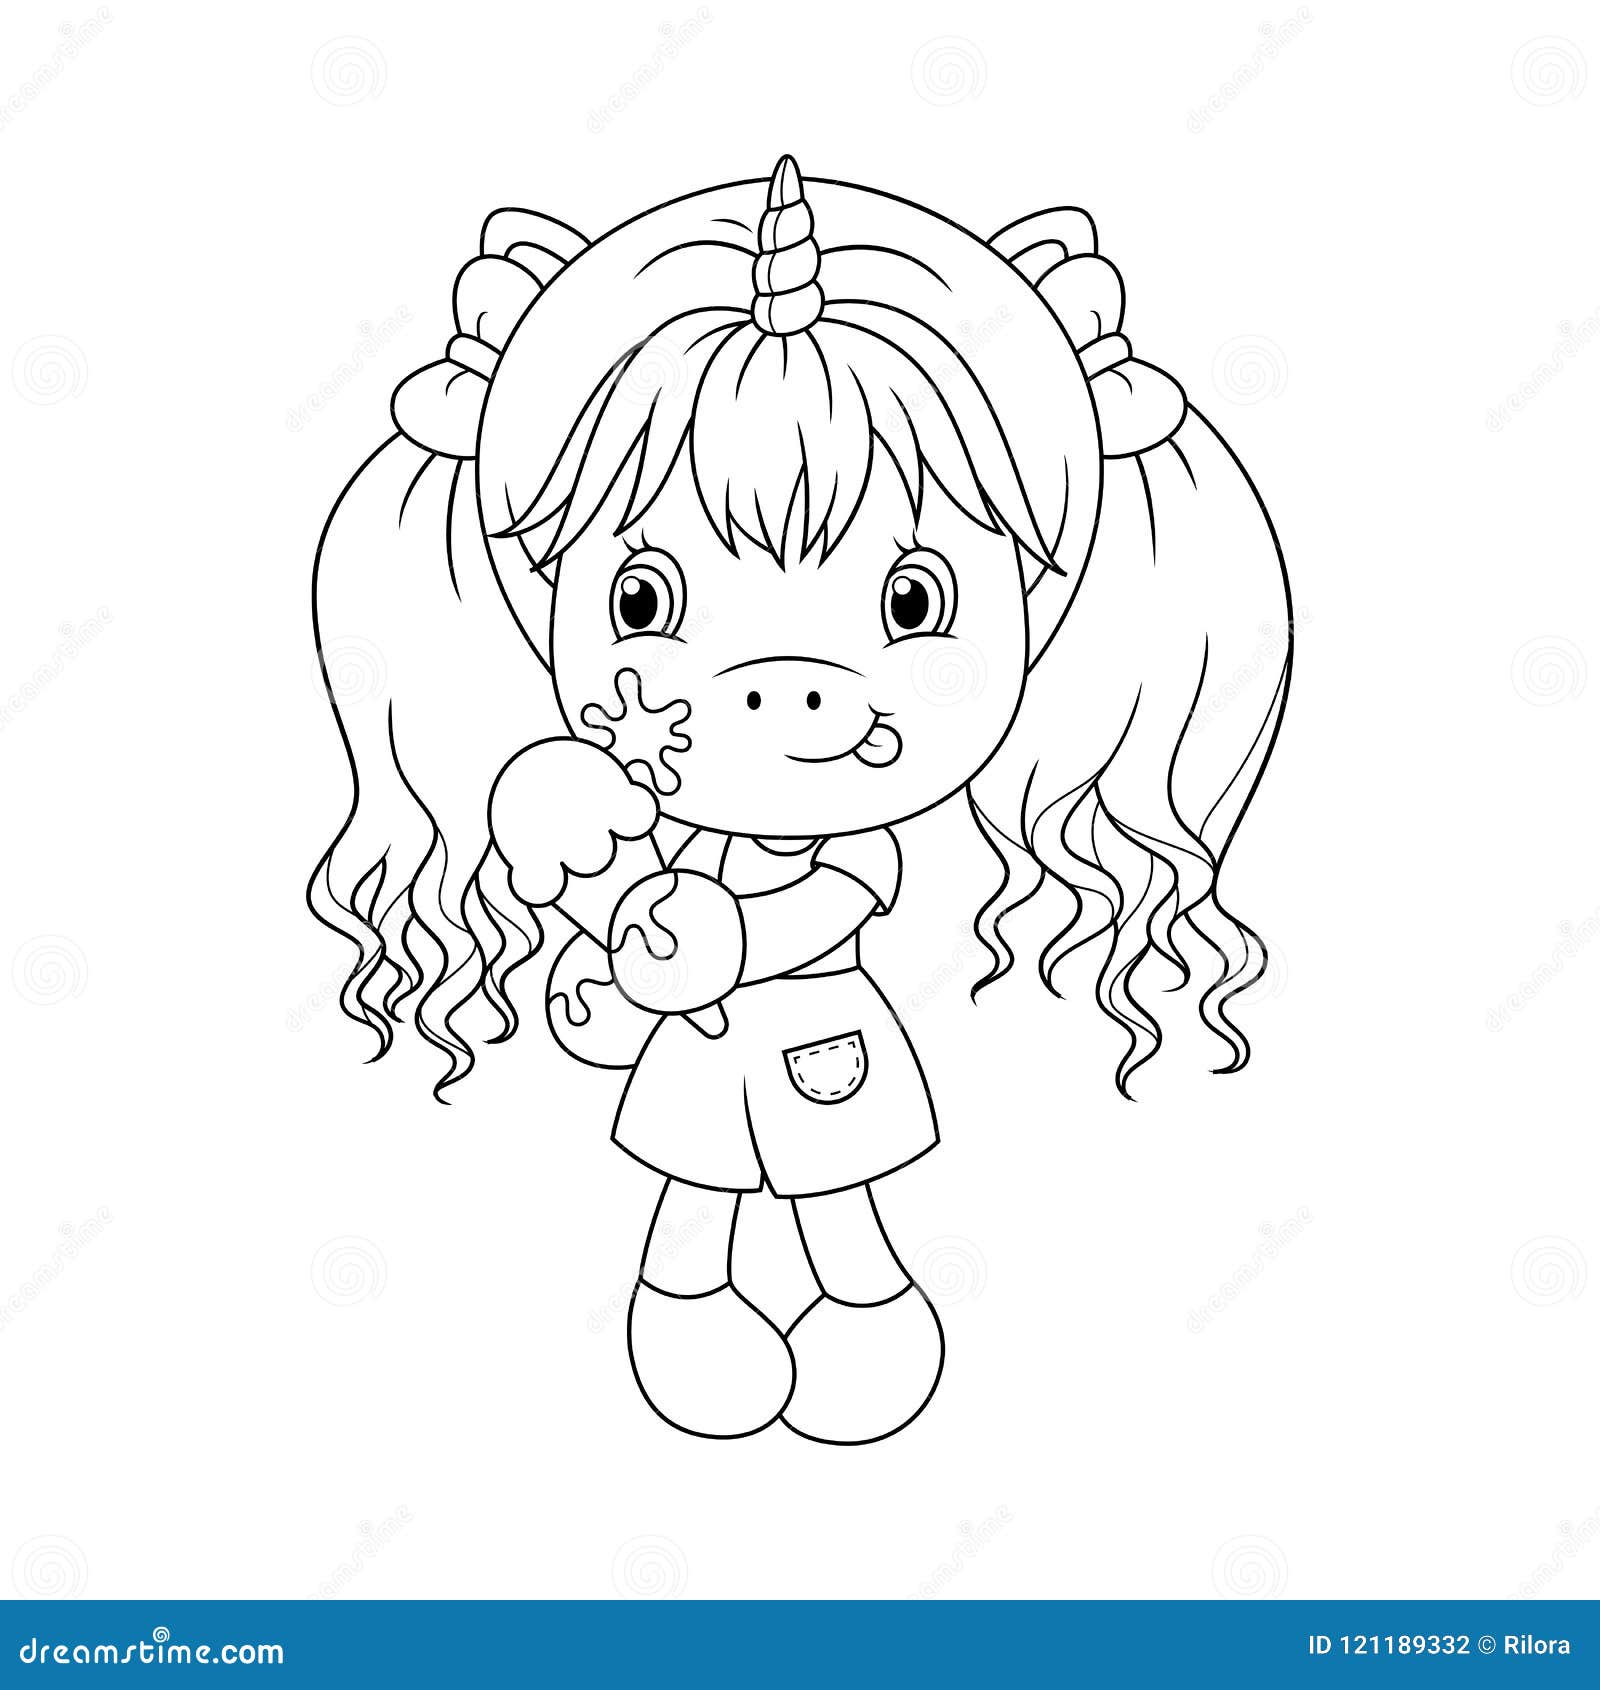 Download Cute Baby Unicorn Holding Ice Cream, Coloring Page For ...